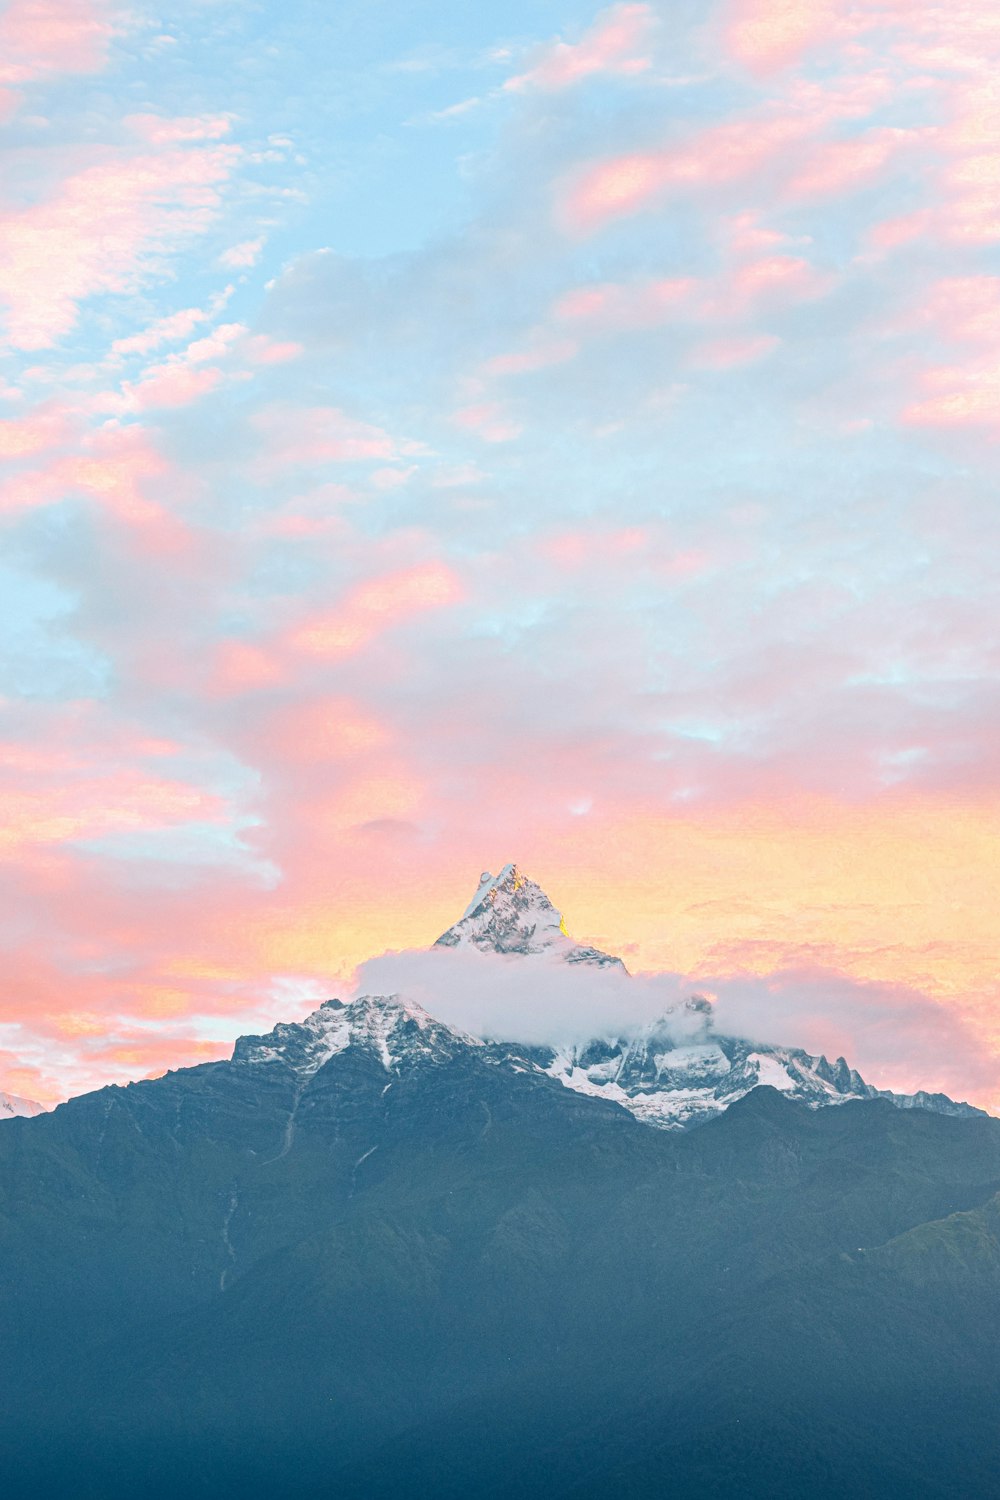 a view of a mountain with a pink sky in the background